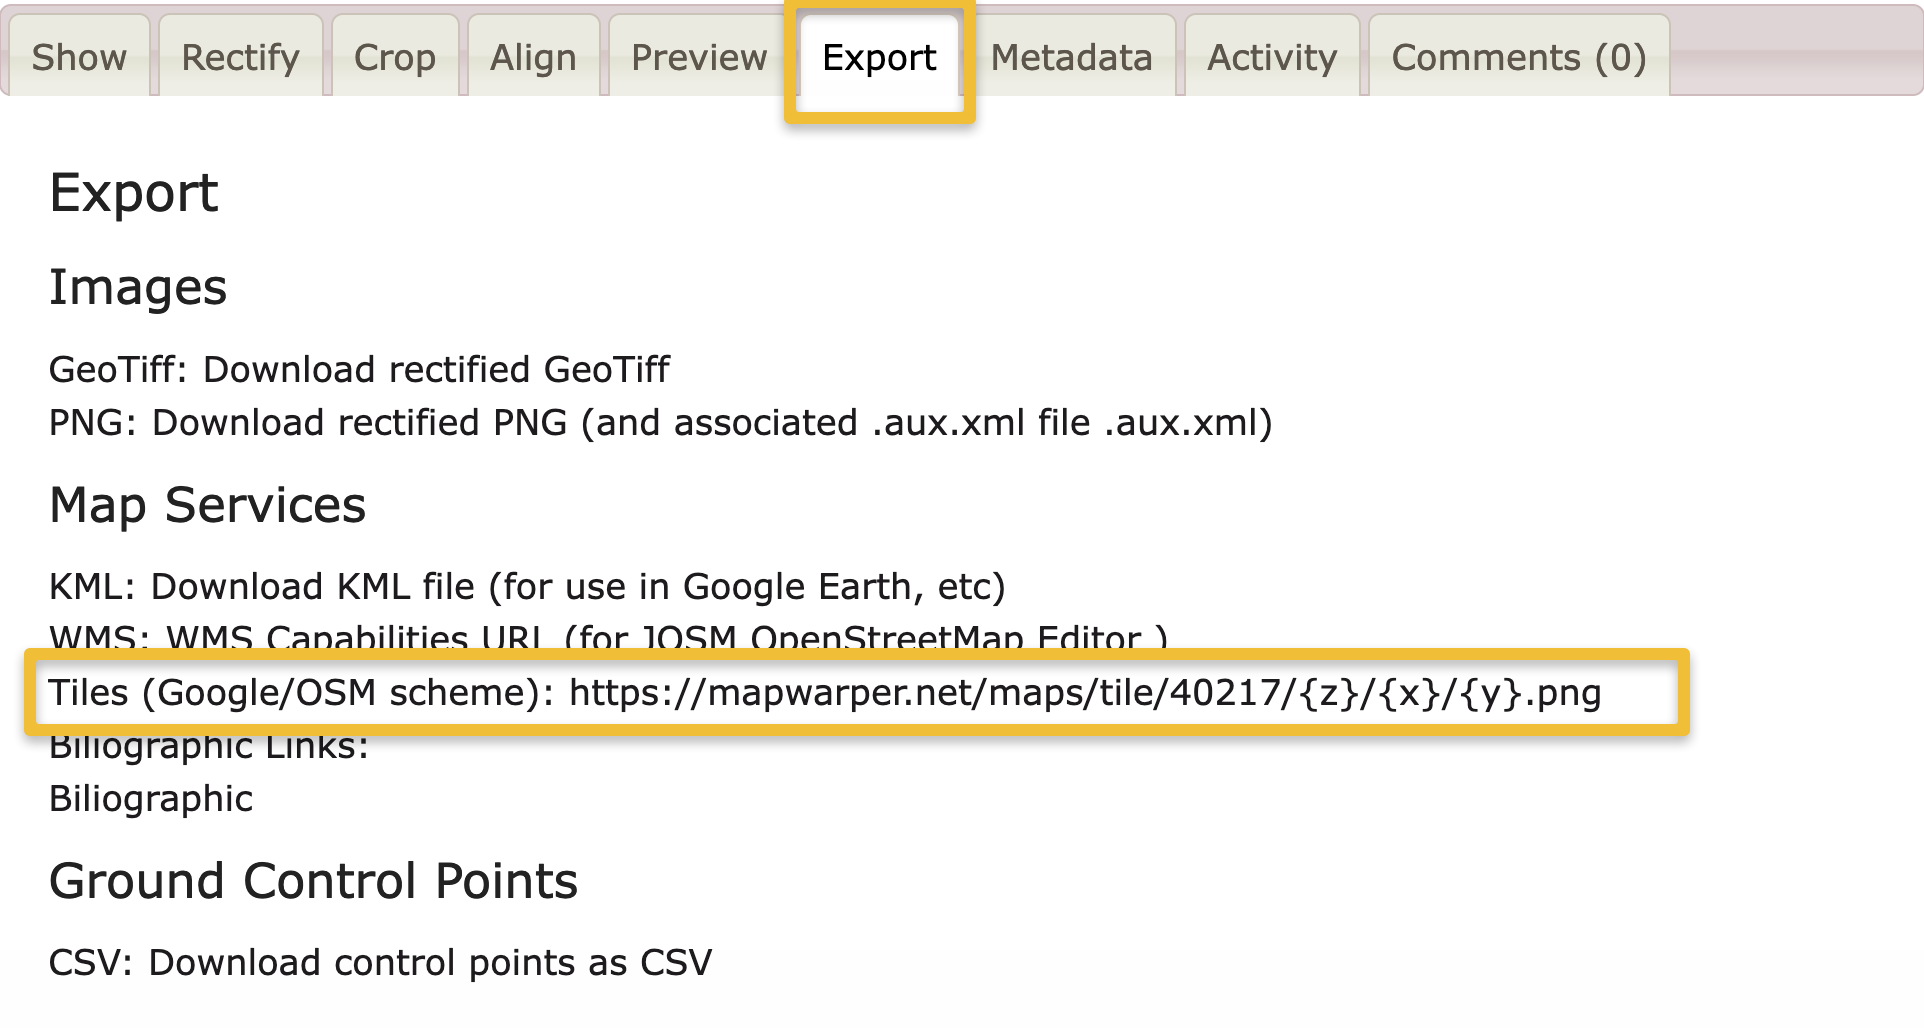 The Tiles (Google/OSM scheme) URL of your georeferenced map can be found under Map Services in Map Warper’s Export tab.